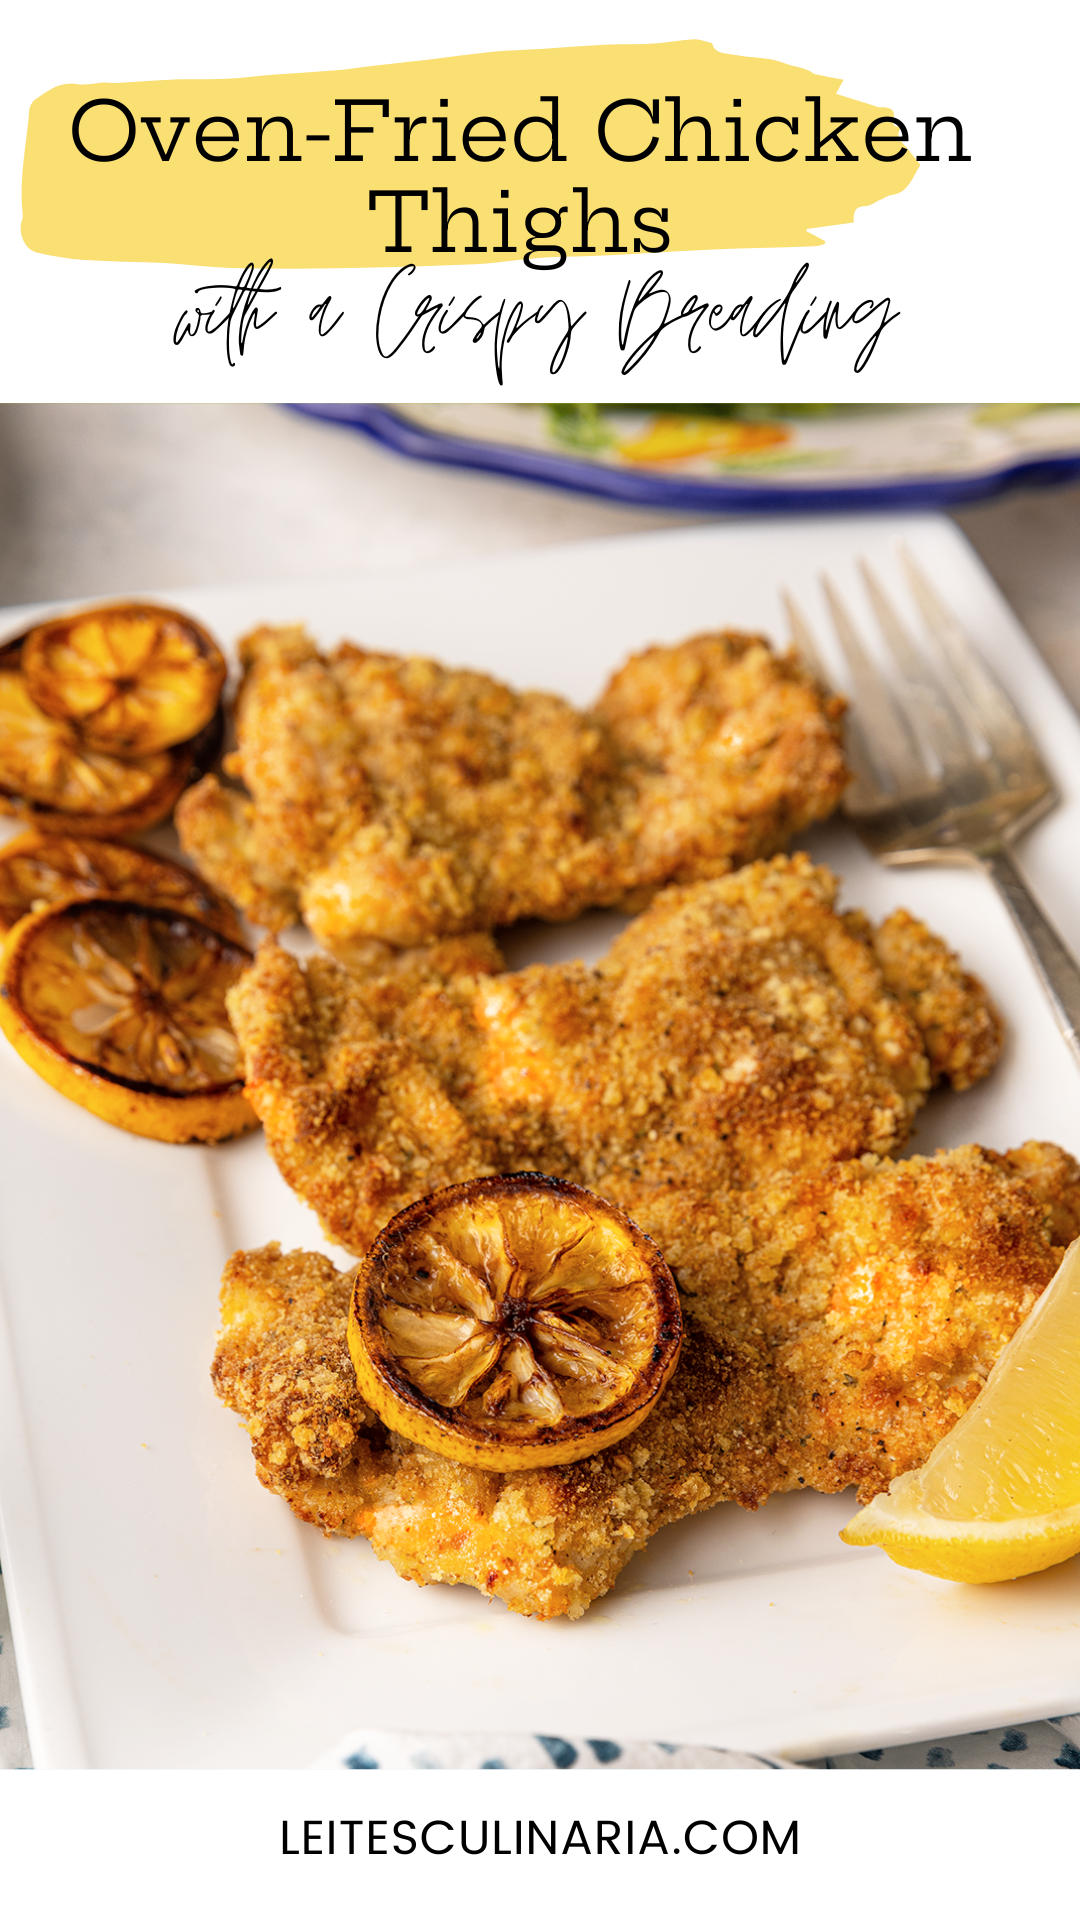 Three breaded chicken thighs on a plate with slices of roasted lemon.